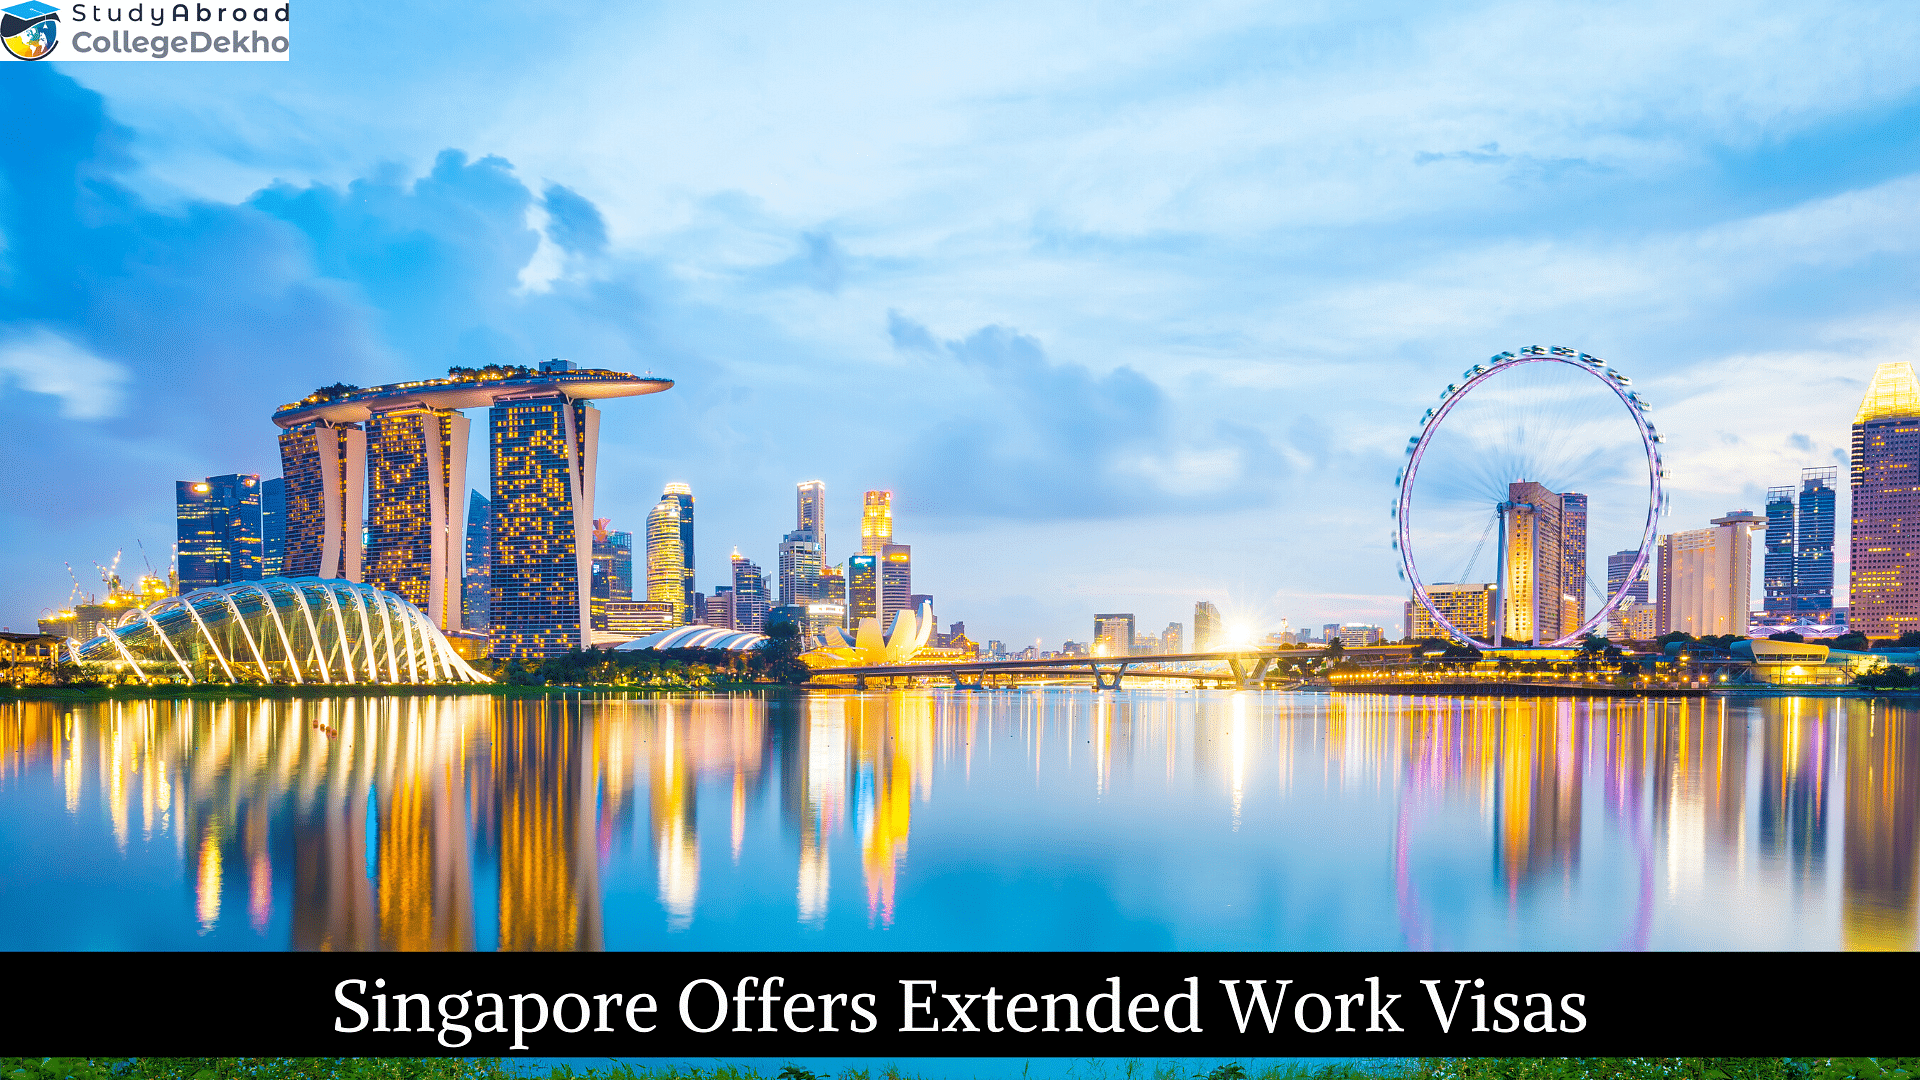 Singapore Offers Extended Work Visas